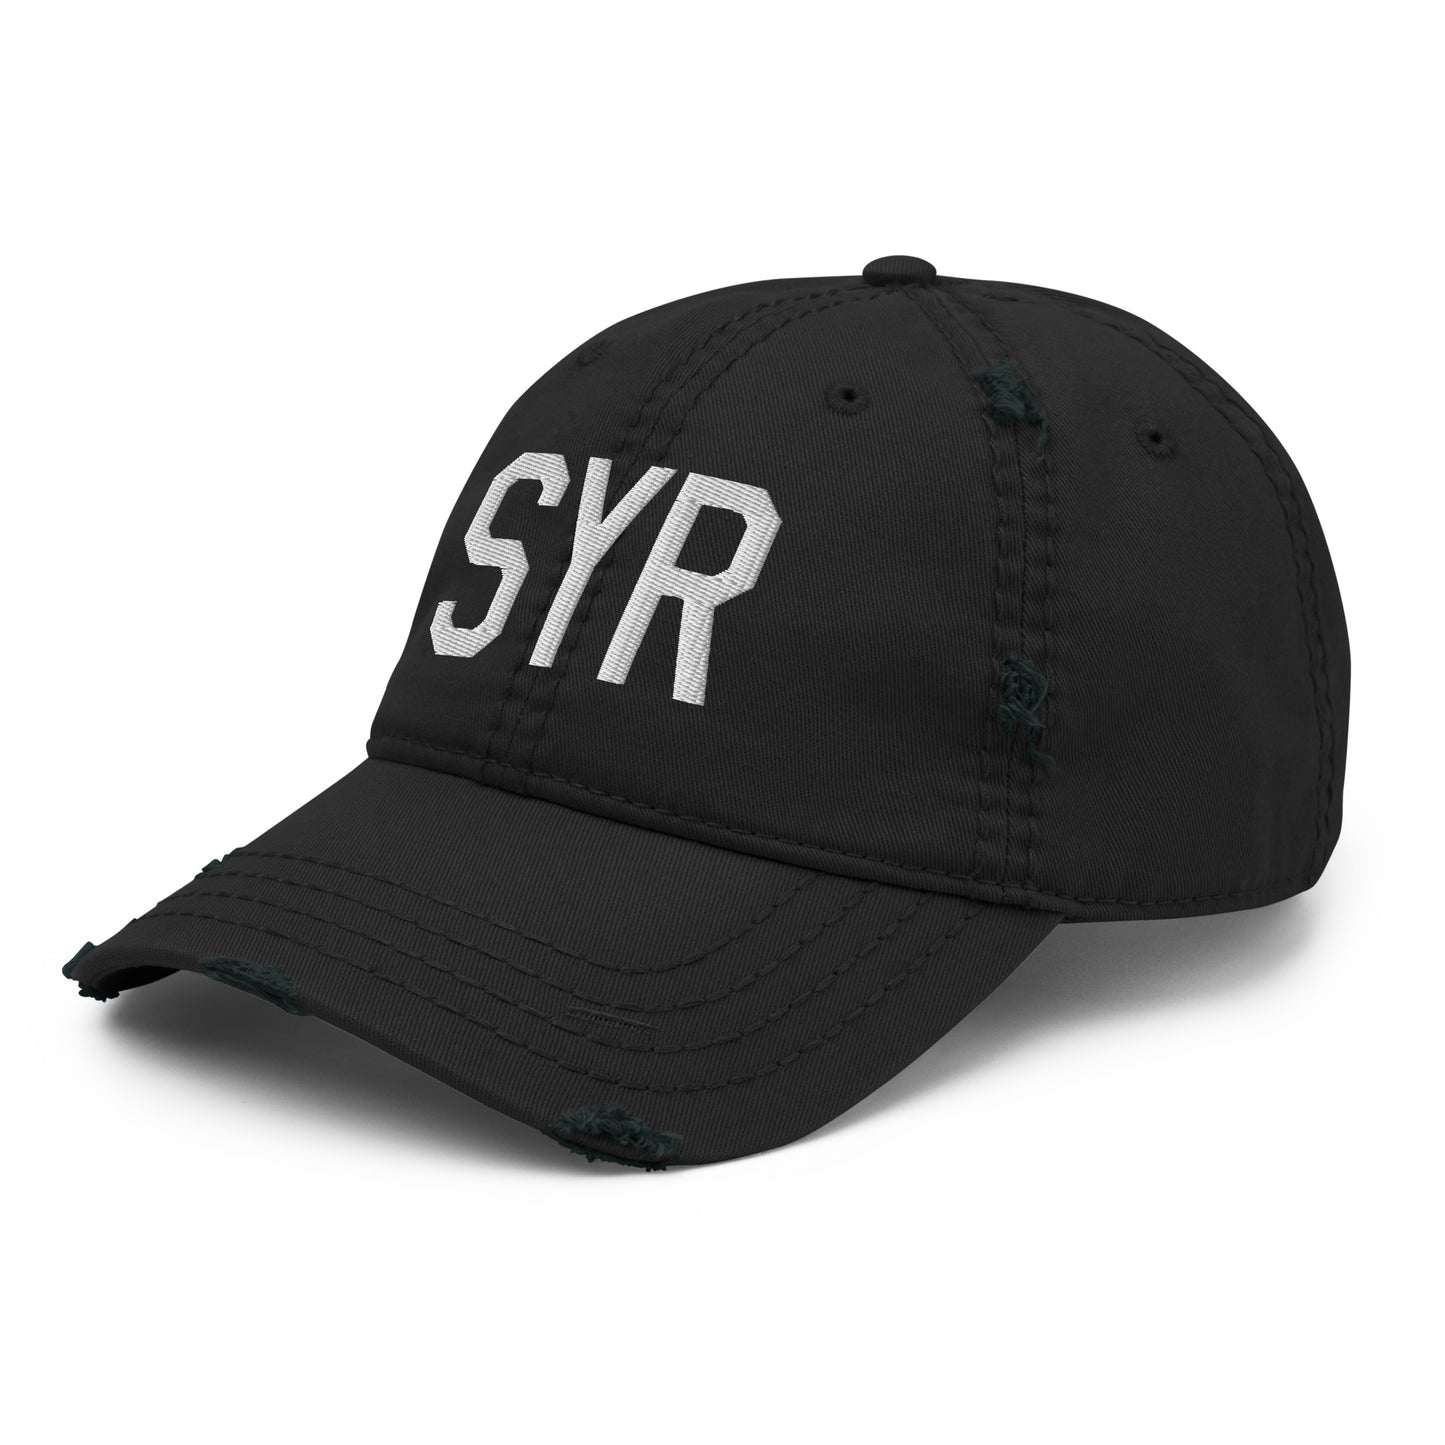 Airport Code Distressed Hat - White • SYR Syracuse • YHM Designs - Image 11